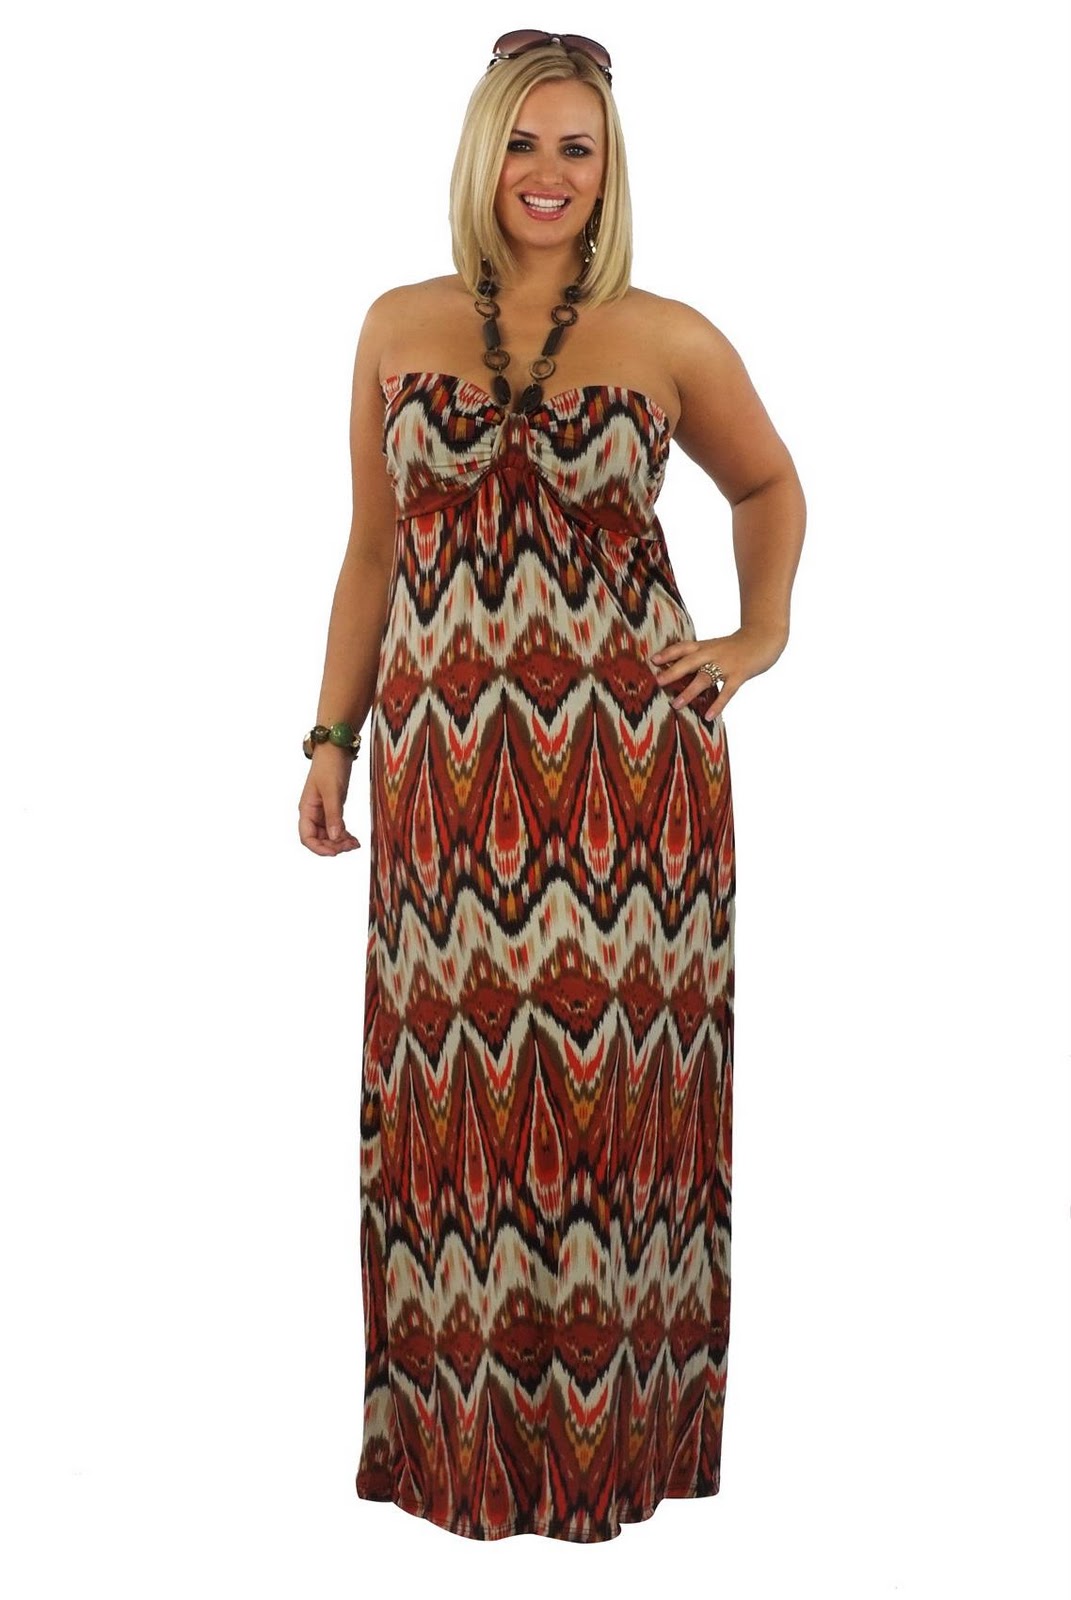 Orange Tribal Print Necklace Detail Maxi Dress. Rollover image to zoom